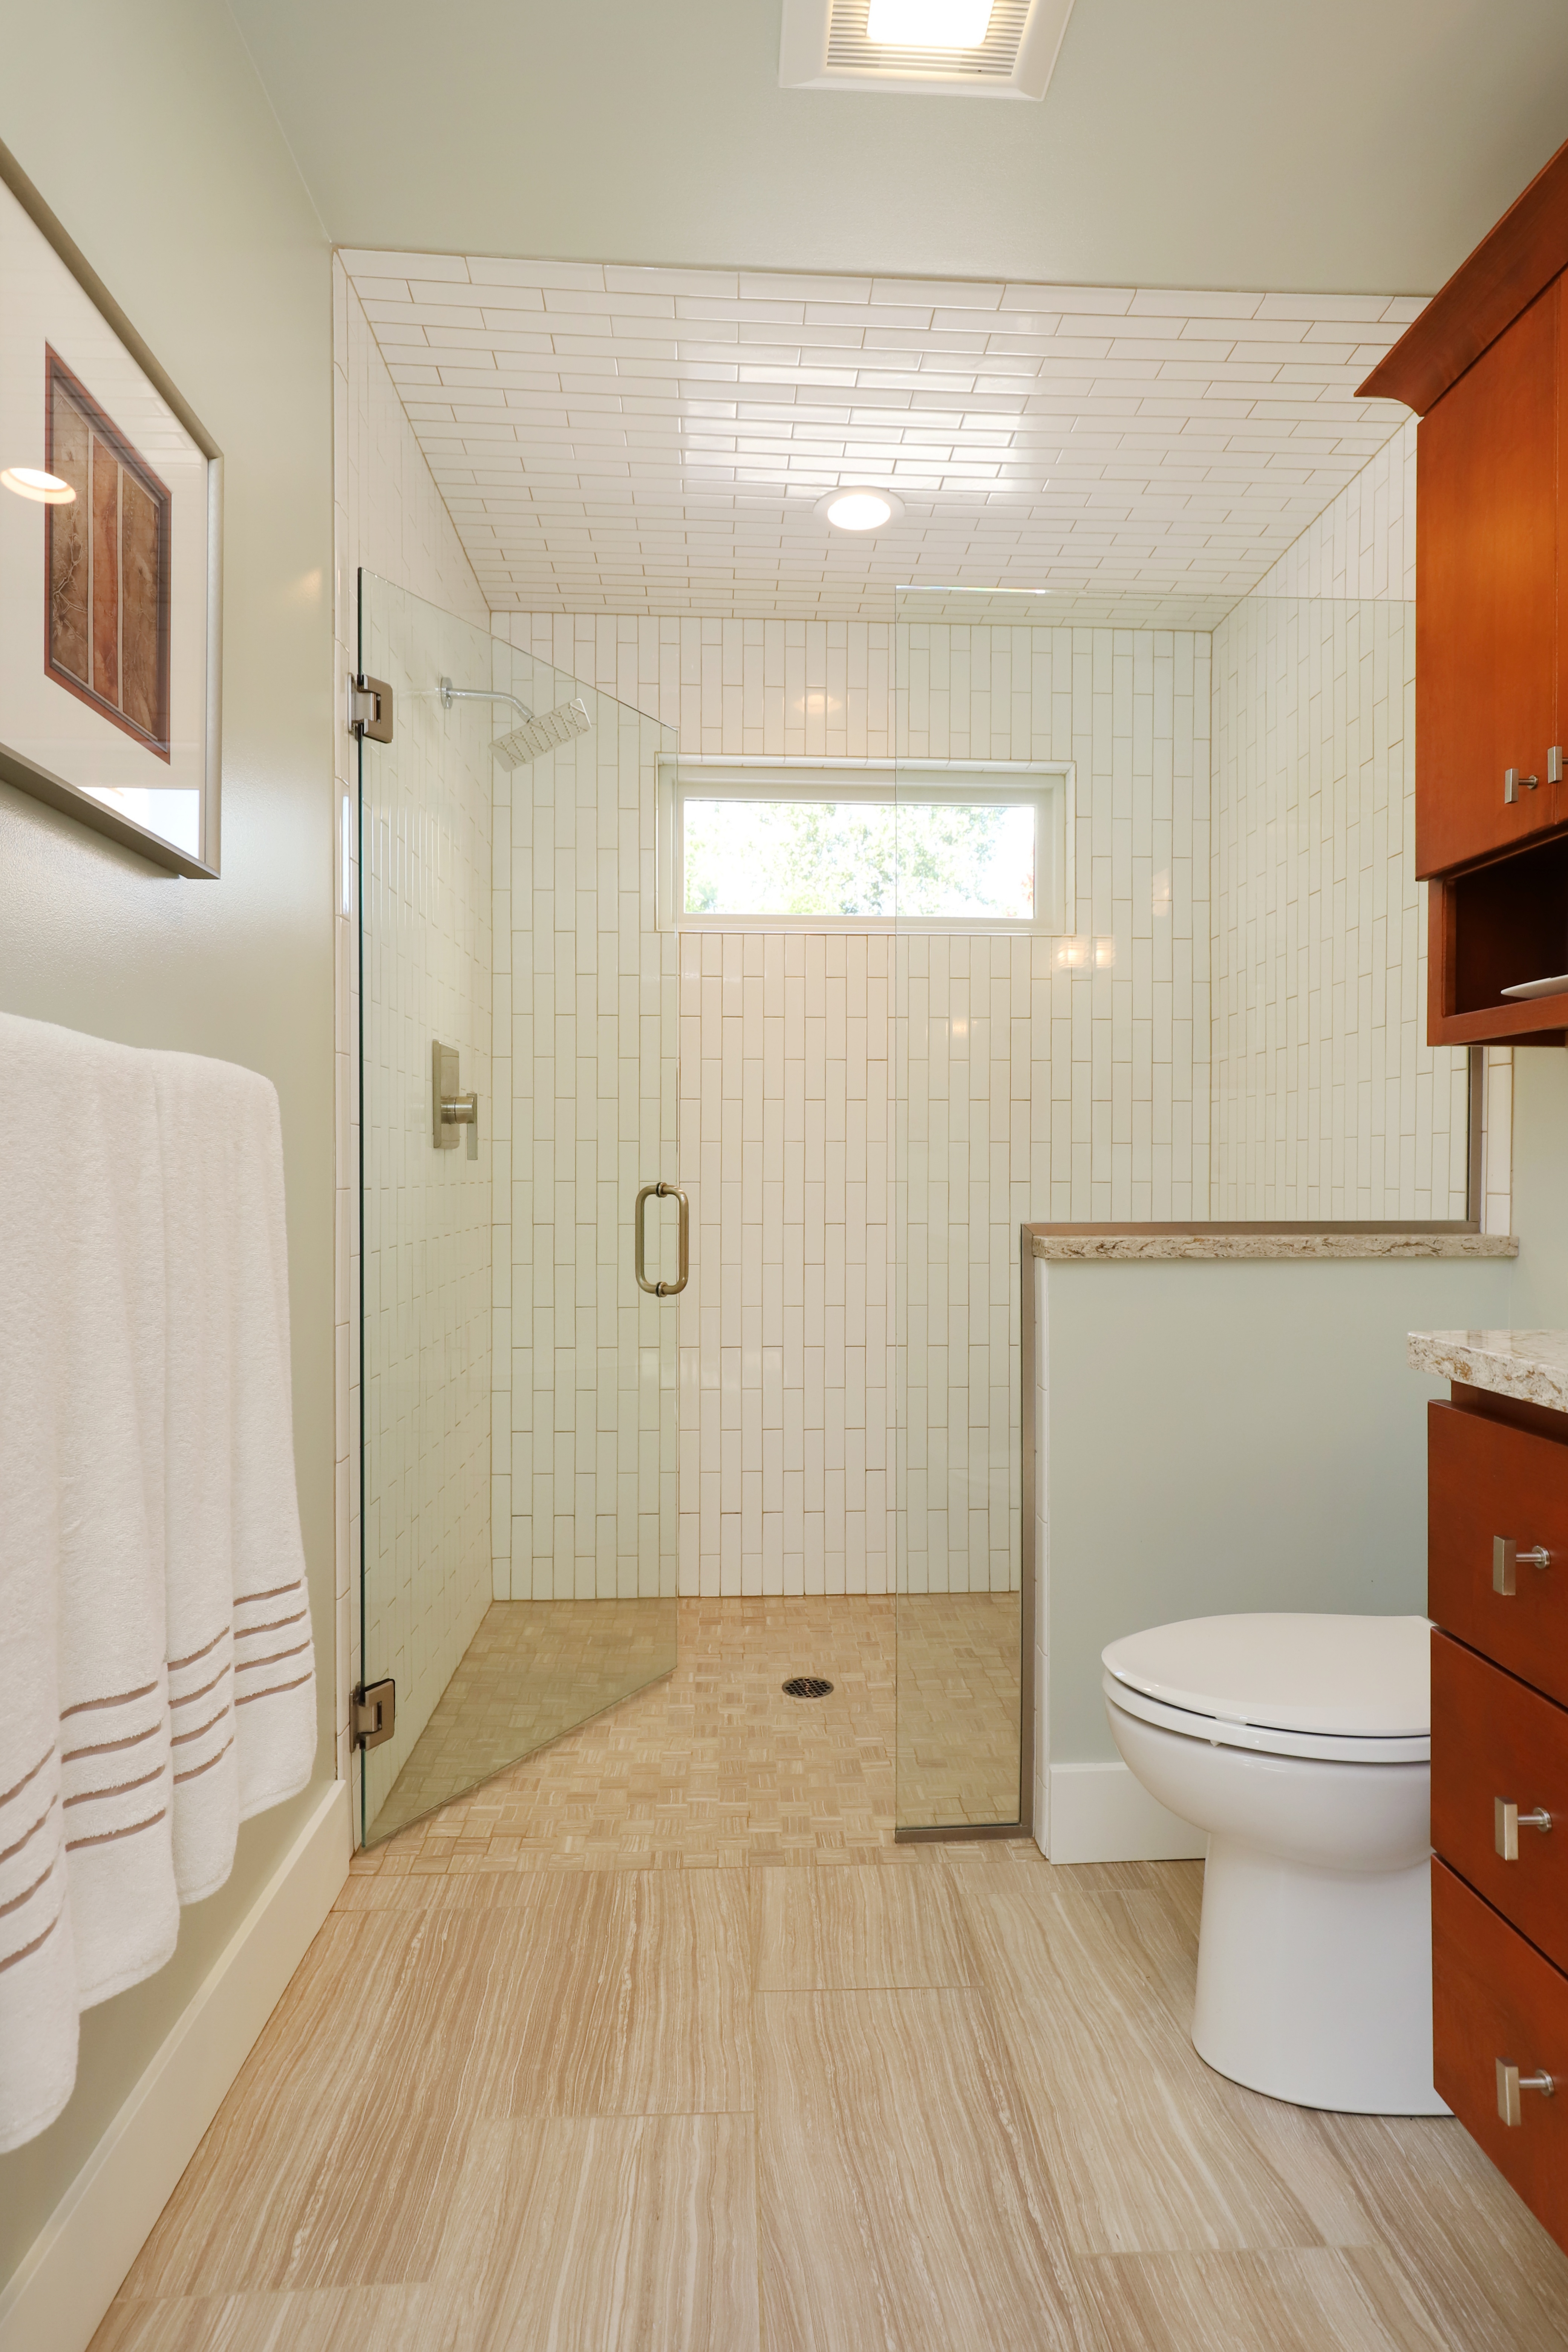 10 Design Tips to Maximize Your Bathroom Space